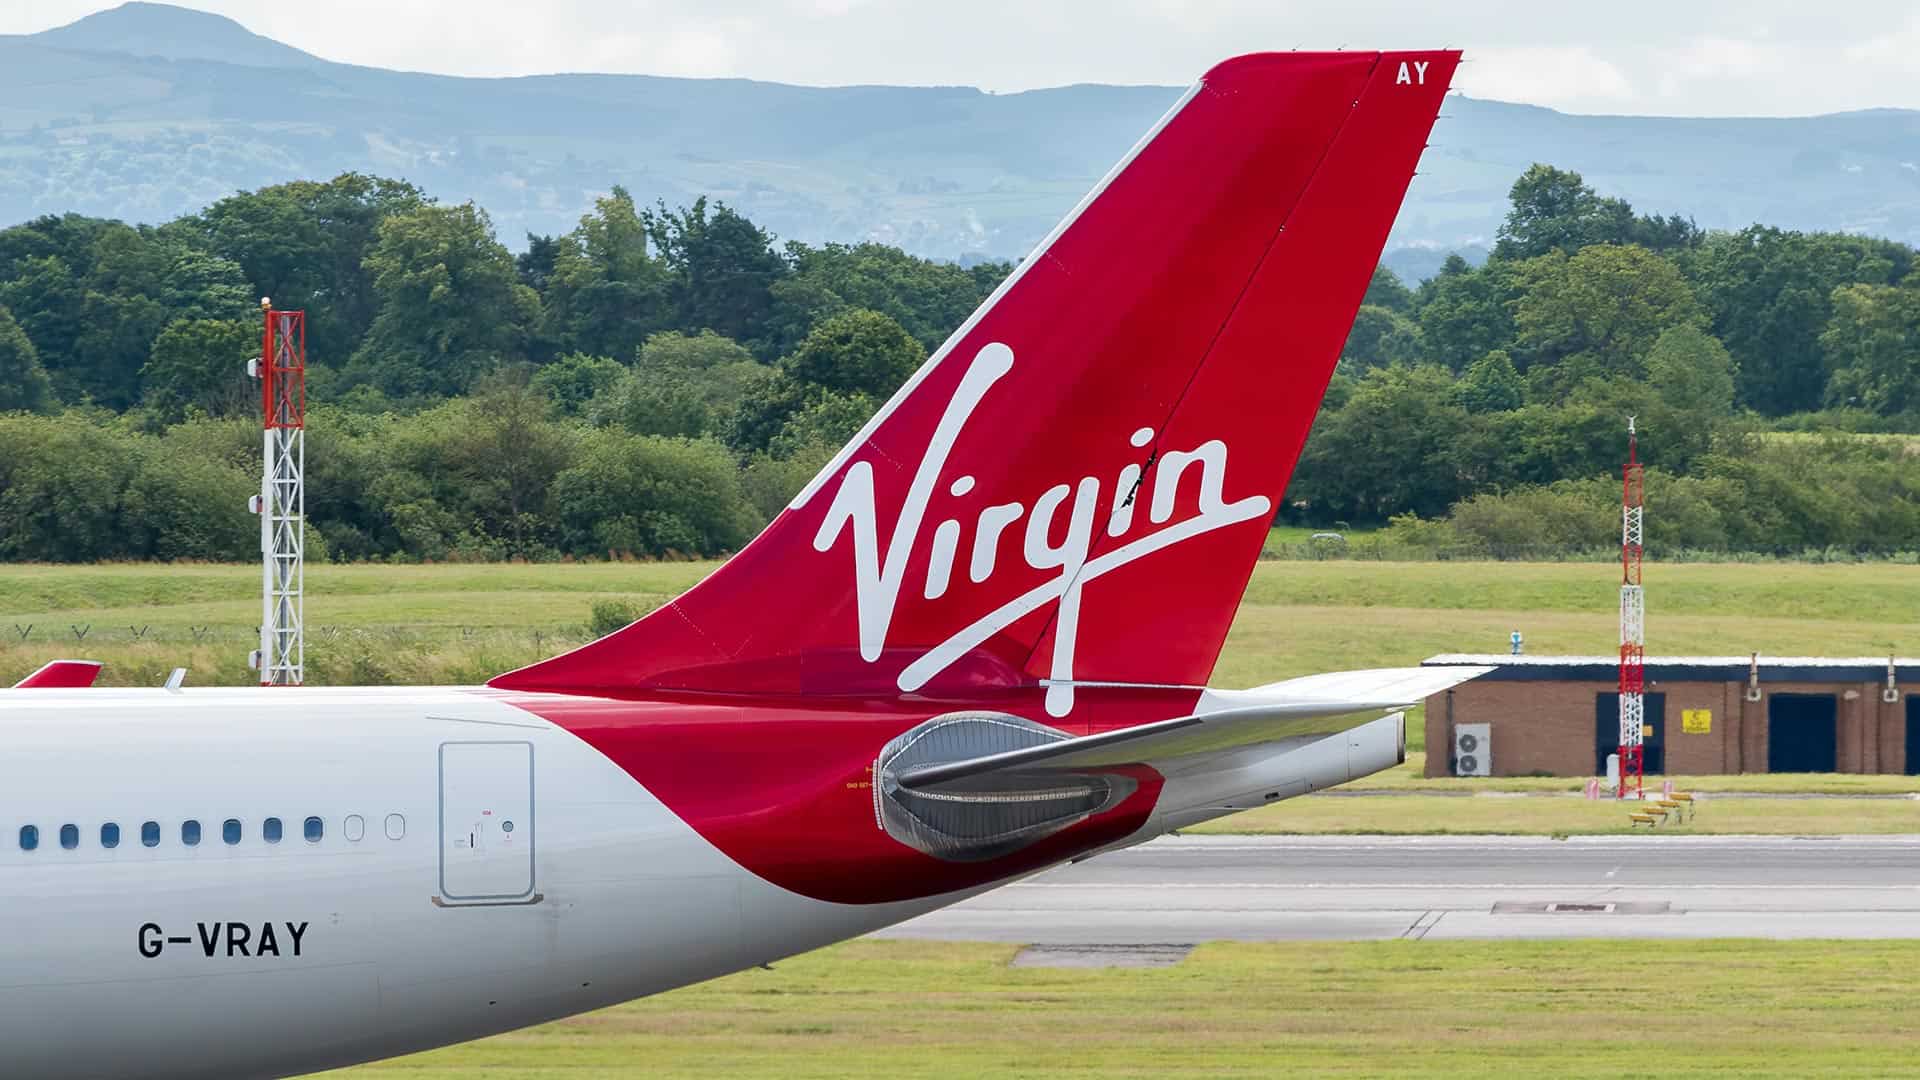 Image of Virgin Airlines